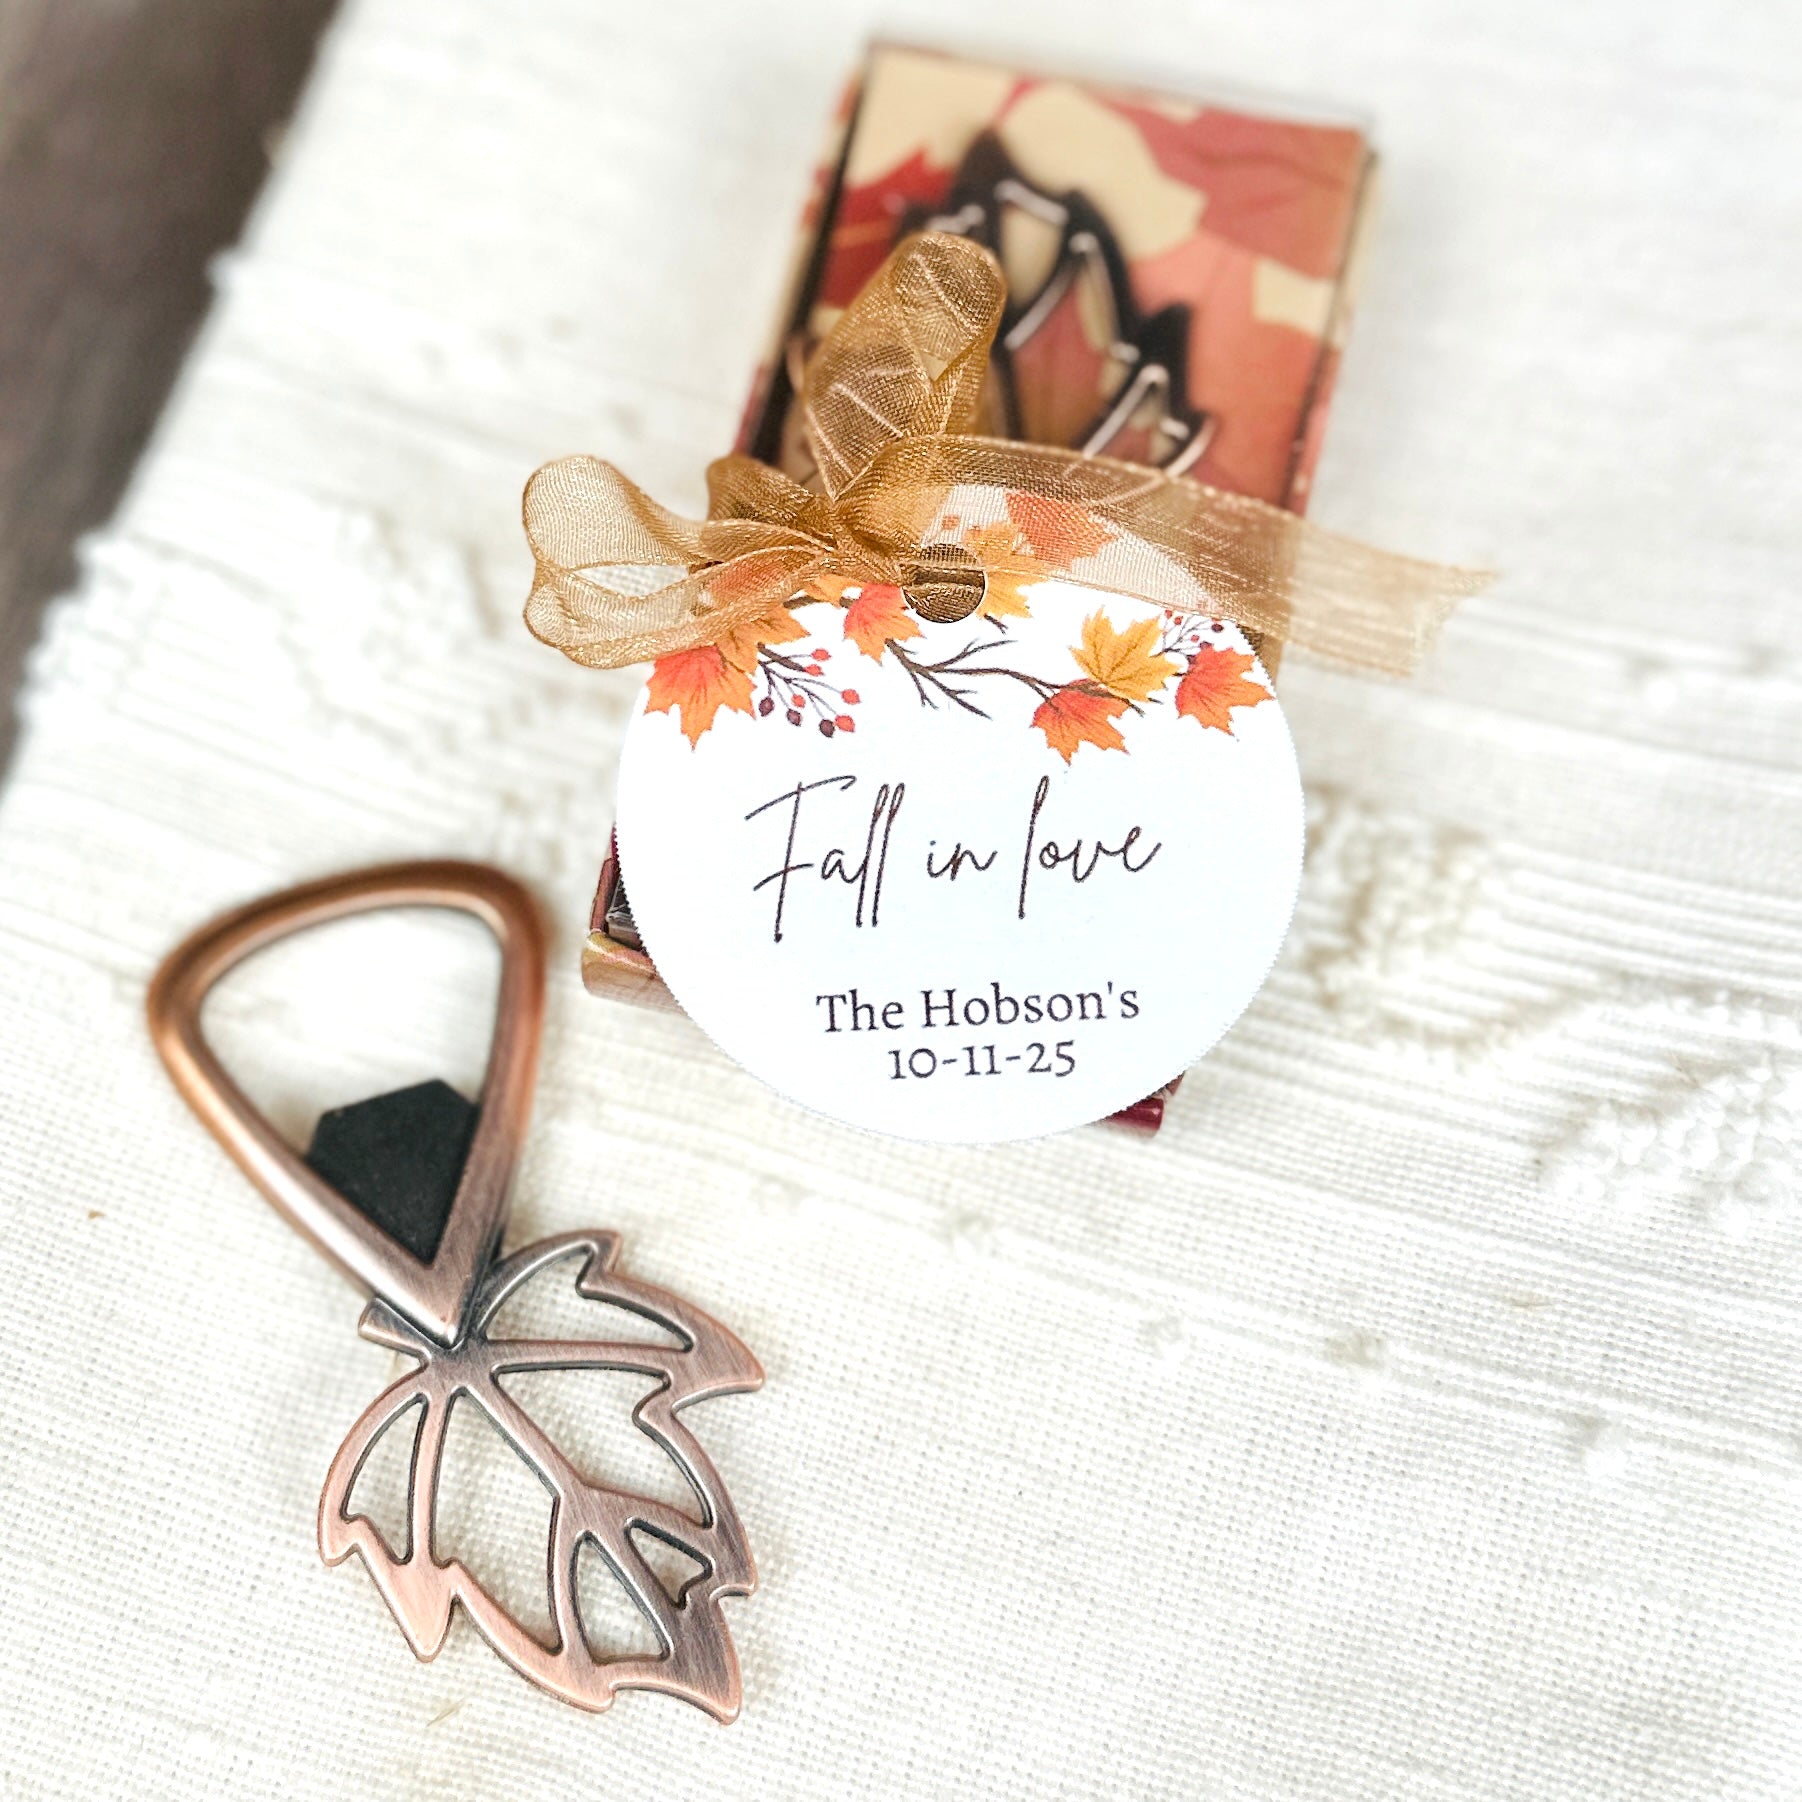 21 Fall Wedding Favors Your Guests Will Fall in Love With - Forever Wedding Favors